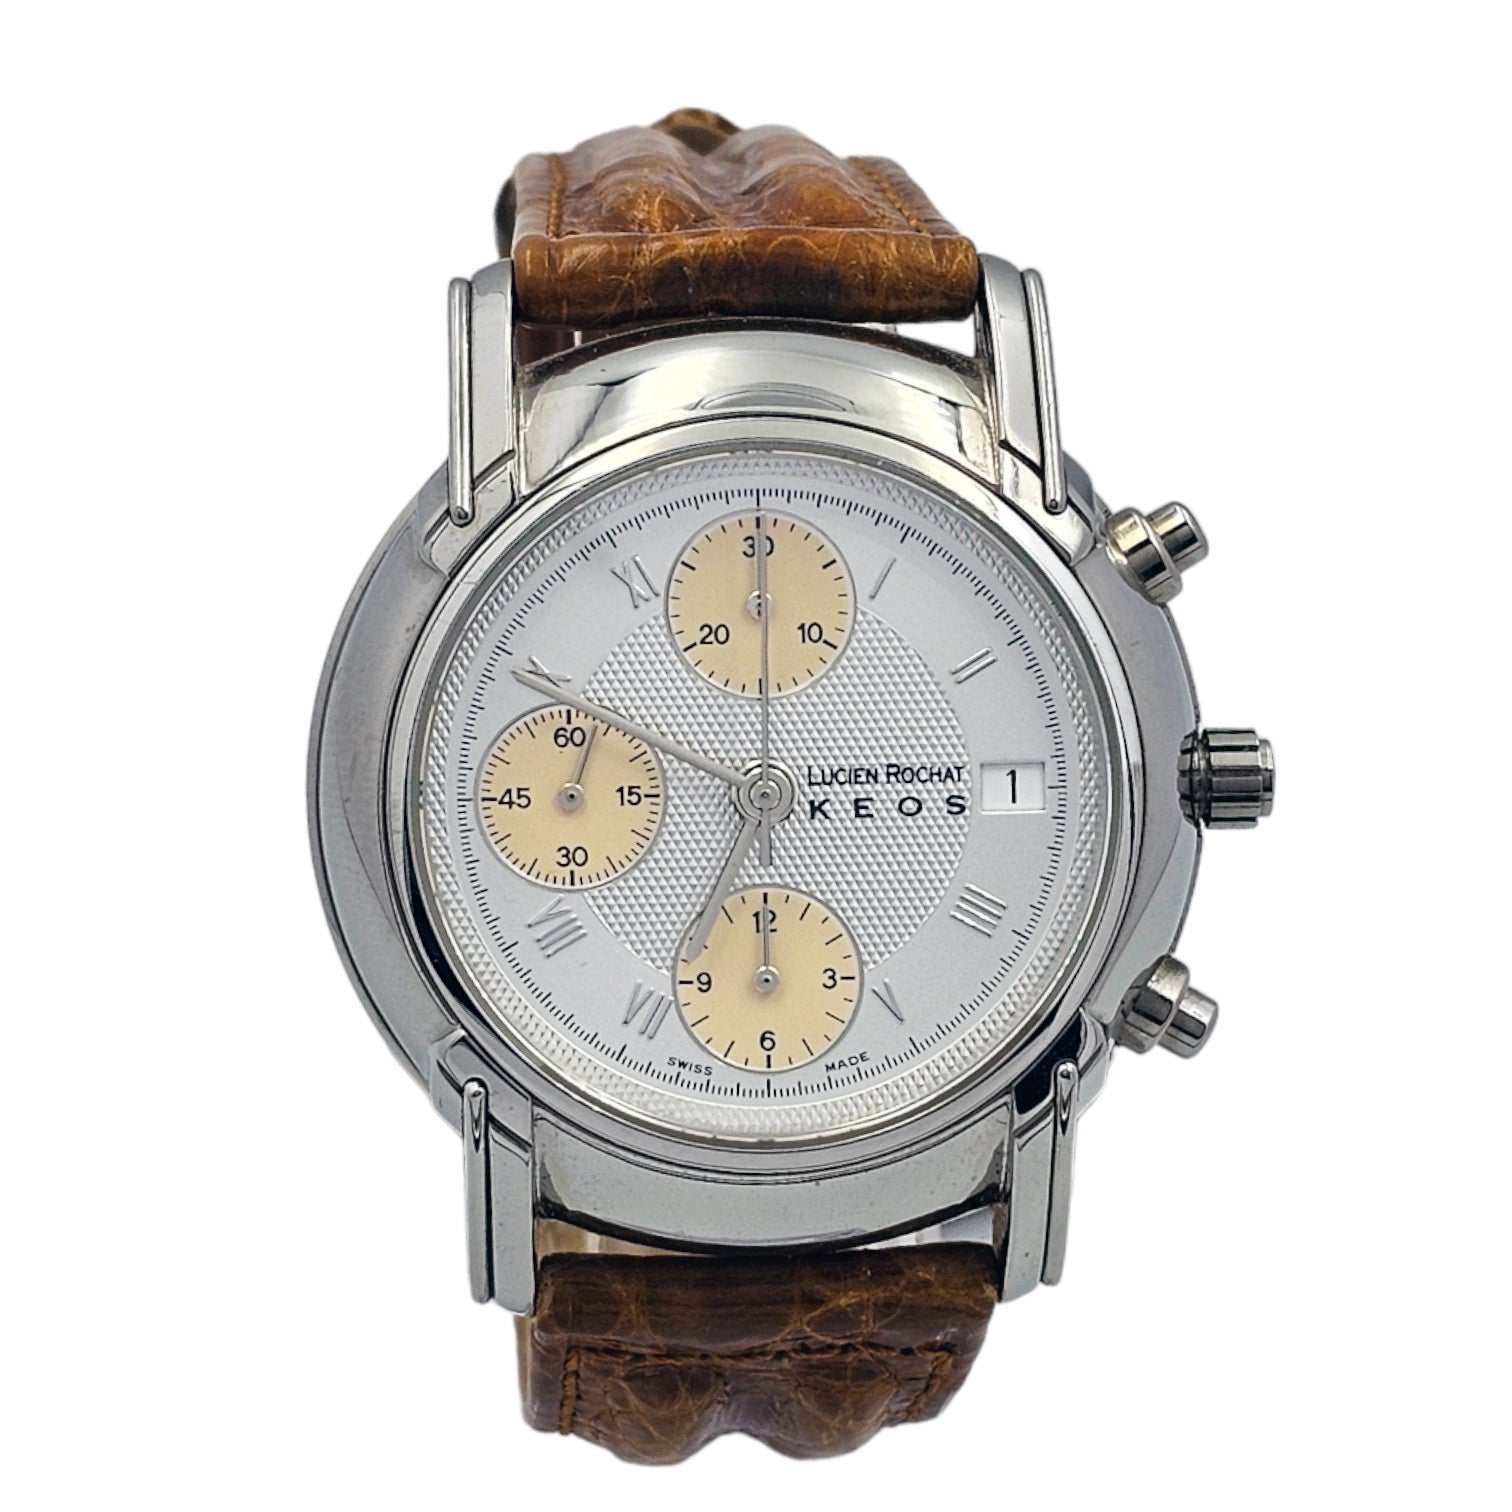 Lucien Rochat Keos Chrono Ref. 0421621015 - ON6340